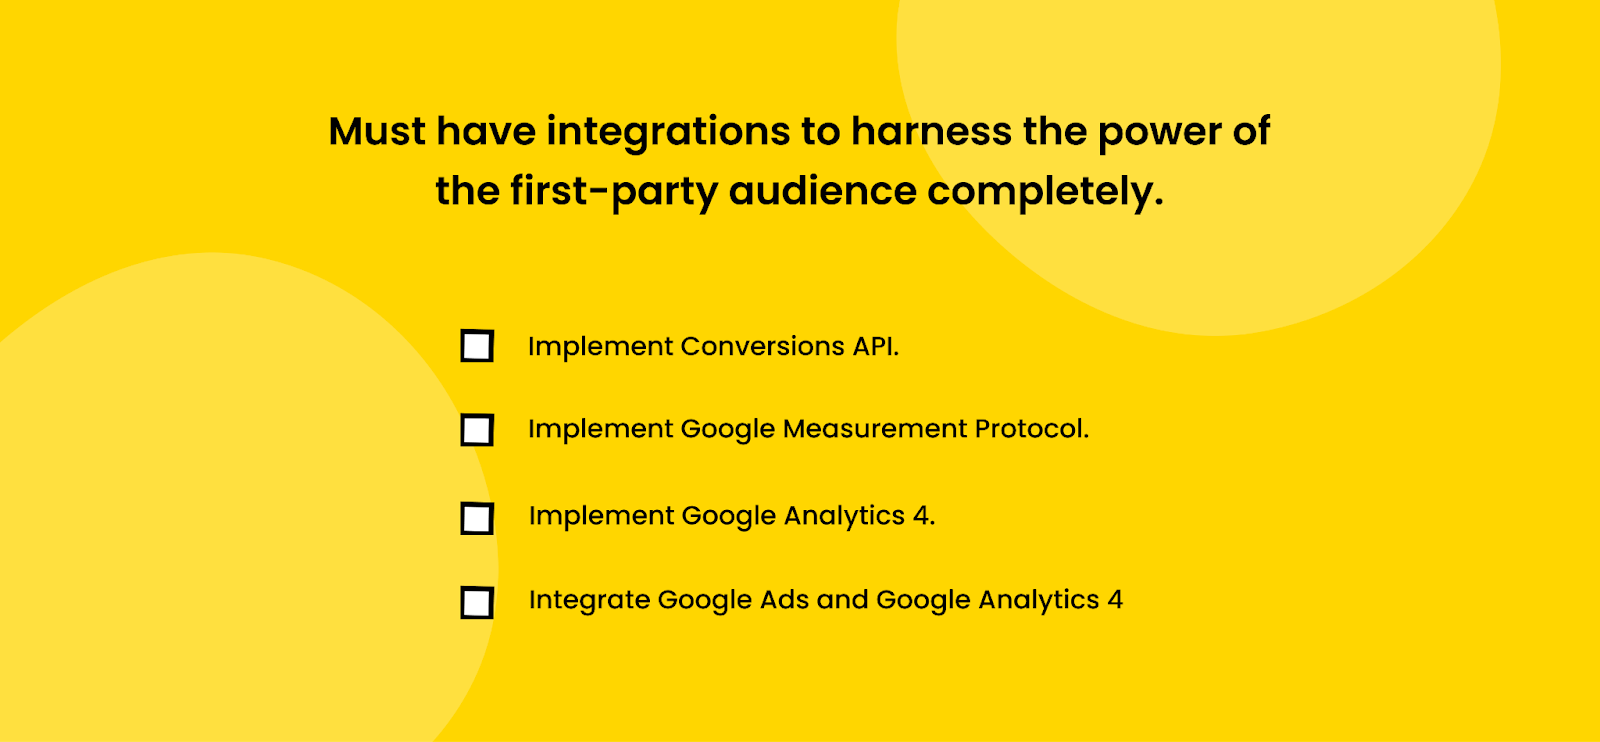 Must have integrations to harness the power of the first-party audience completely. 